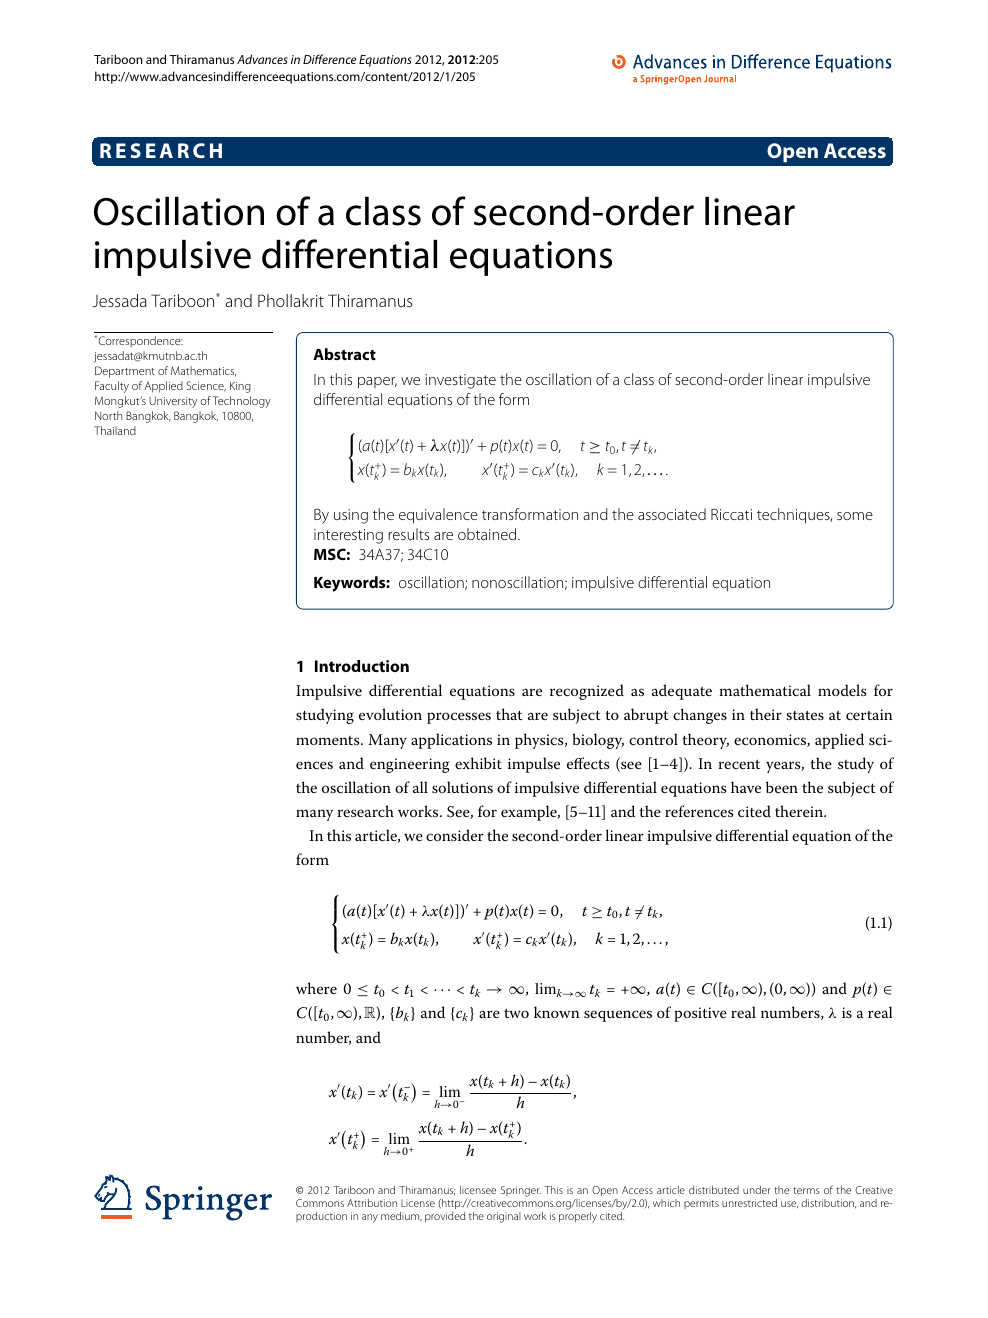 Oscillation Of A Class Of Second Order Linear Impulsive Differential Equations Topic Of Research Paper In Mathematics Download Scholarly Article Pdf And Read For Free On Cyberleninka Open Science Hub